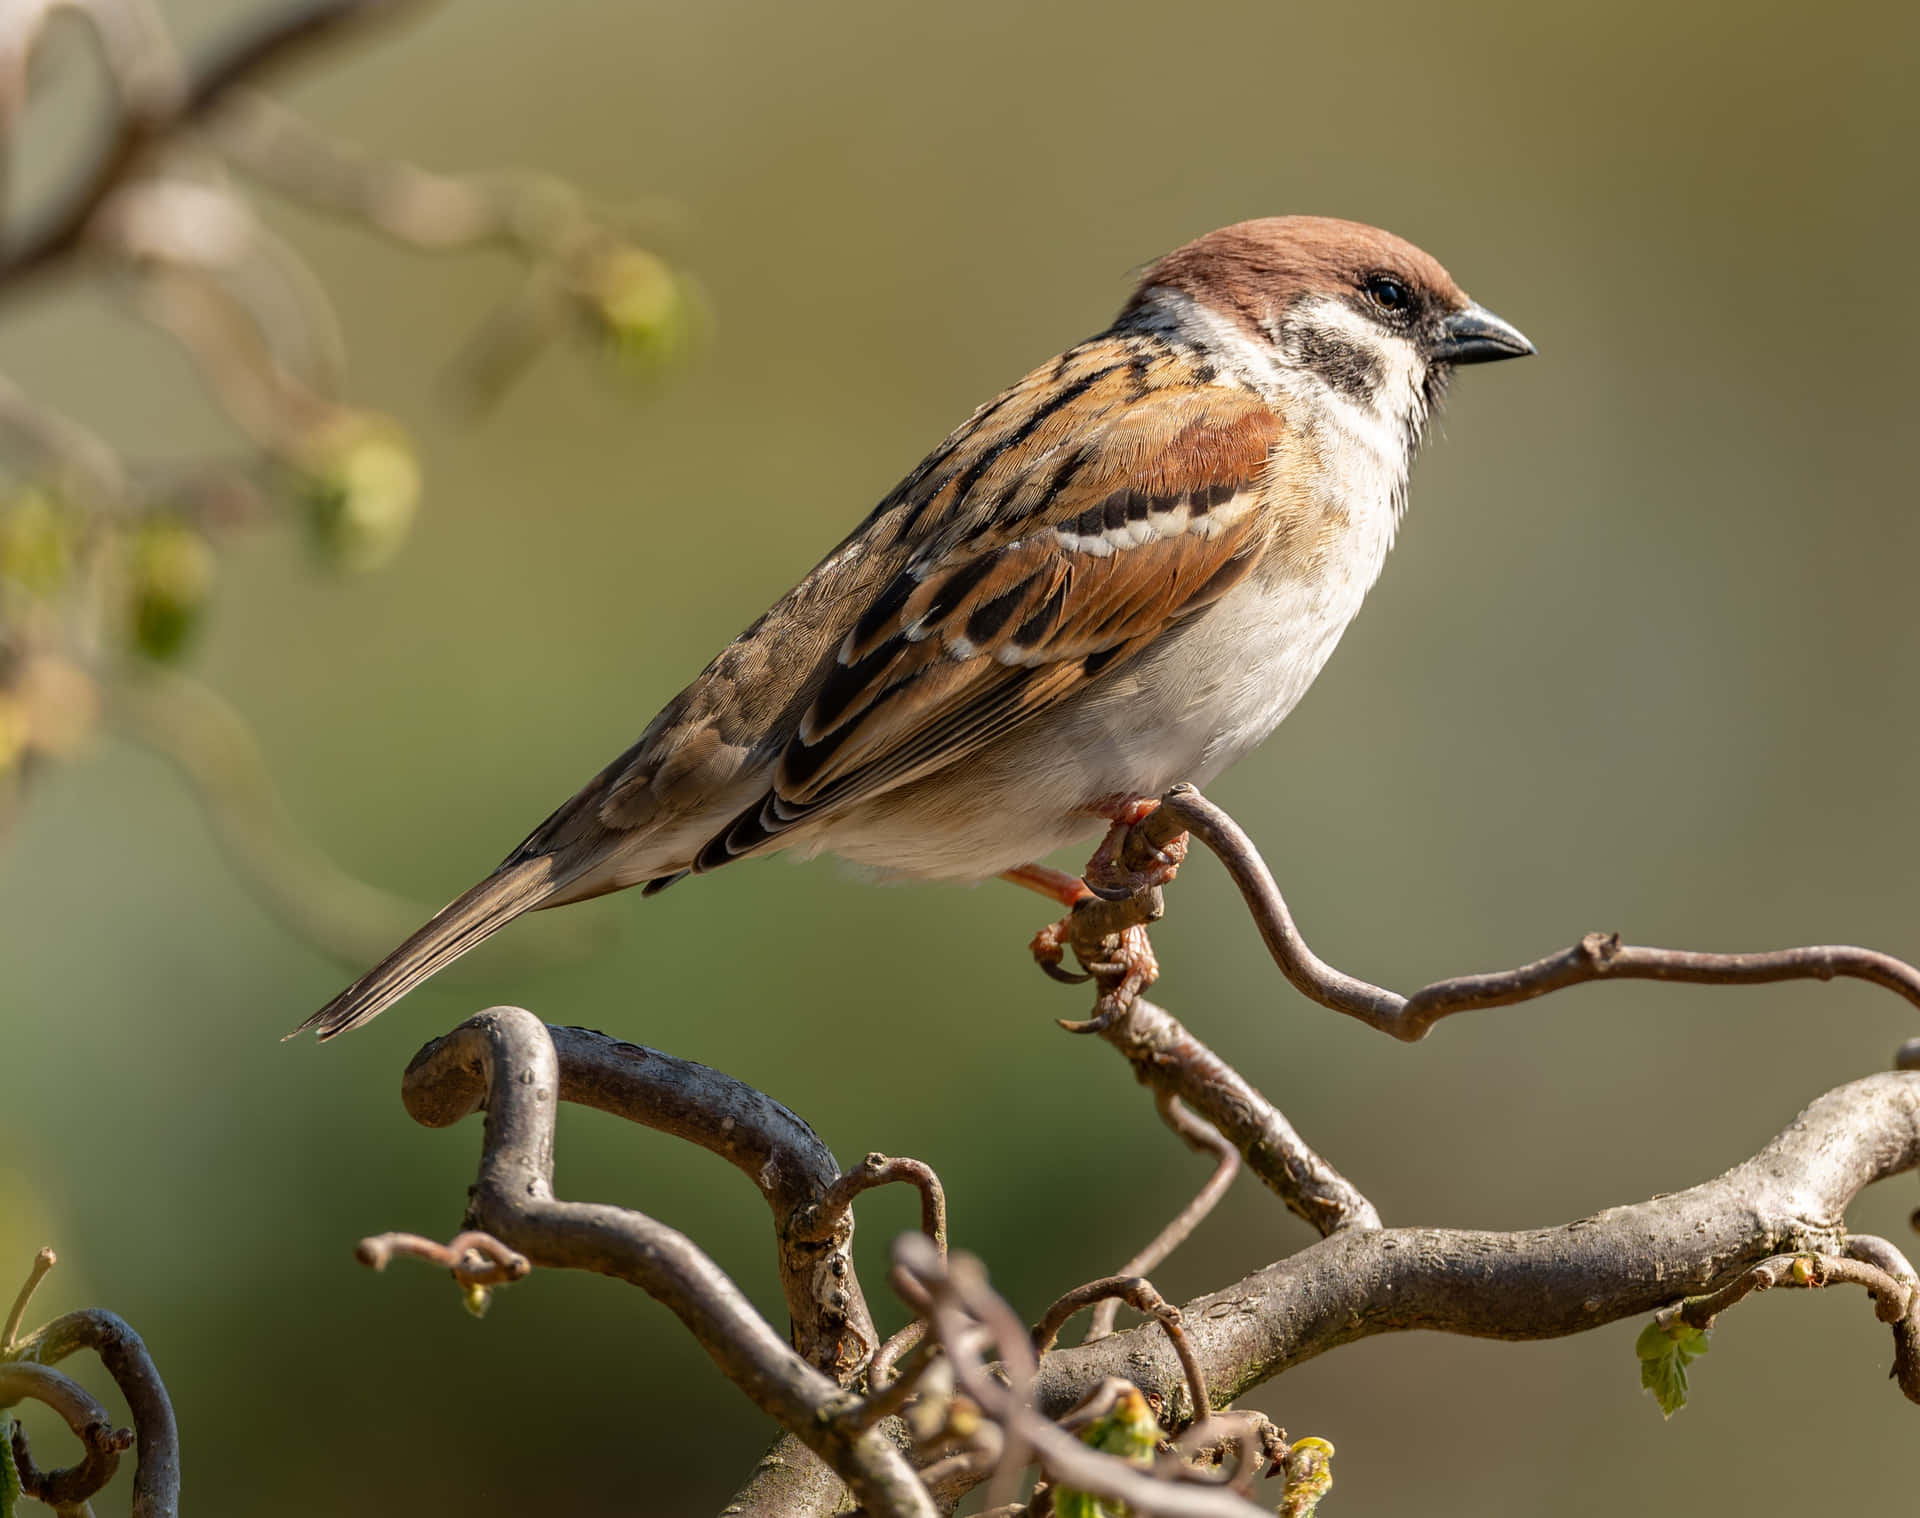 A Small Sparrow on a Tree Branch